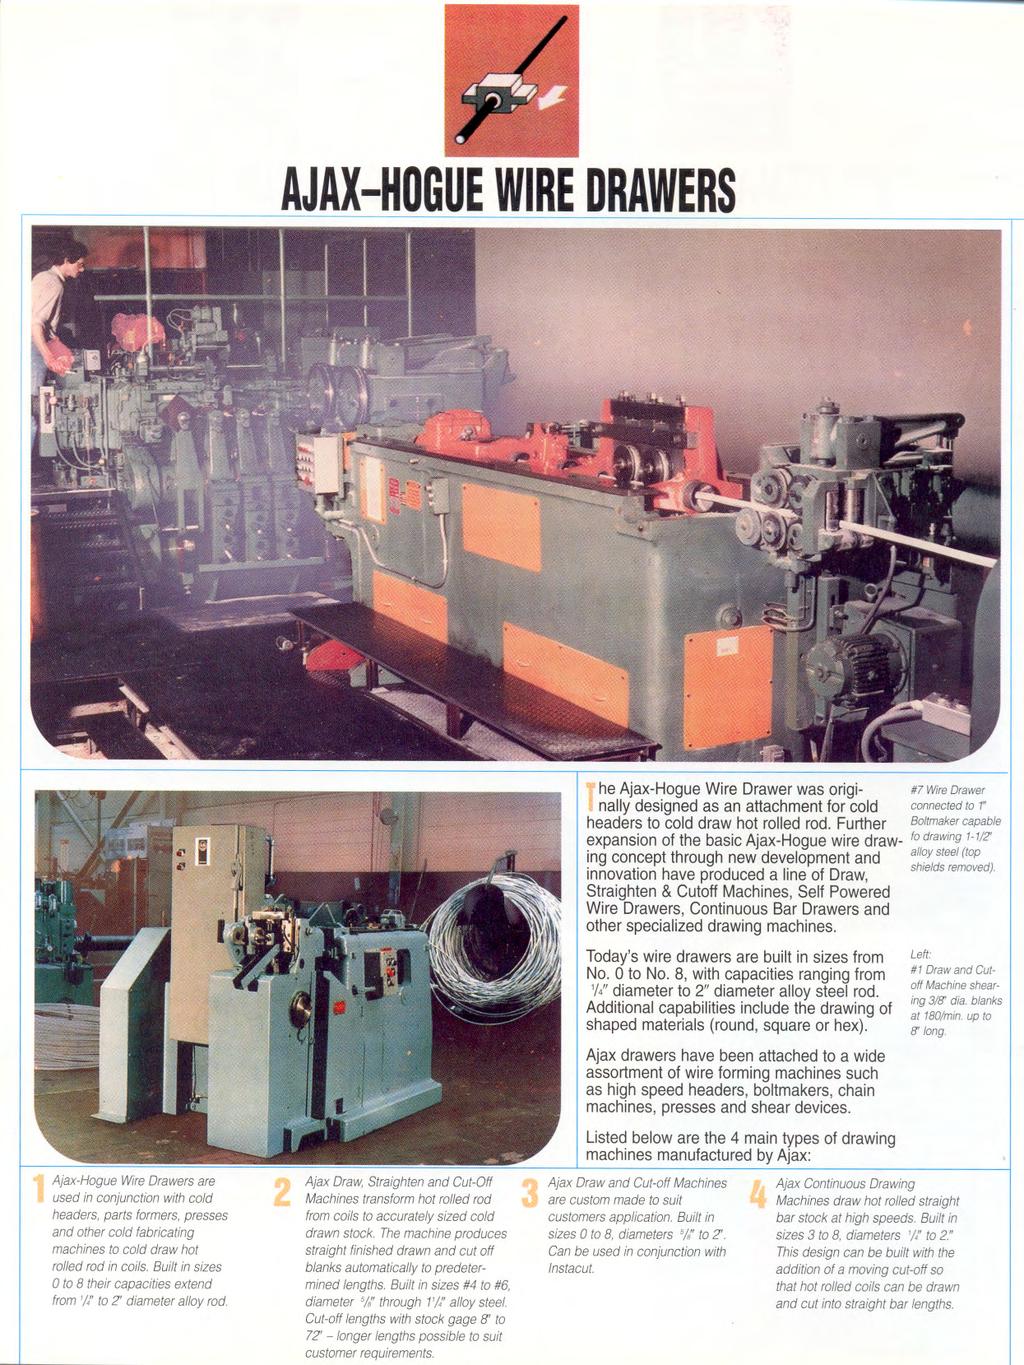 AJAX-HOGUEWIREDRAWERS "he Ajax-Hogue Wire Drawer was origi- #7WireDrawer I nally designed as an attachment for cold connectedto 1" headers to cold draw hot rolled rod, Further Boltmaker capable